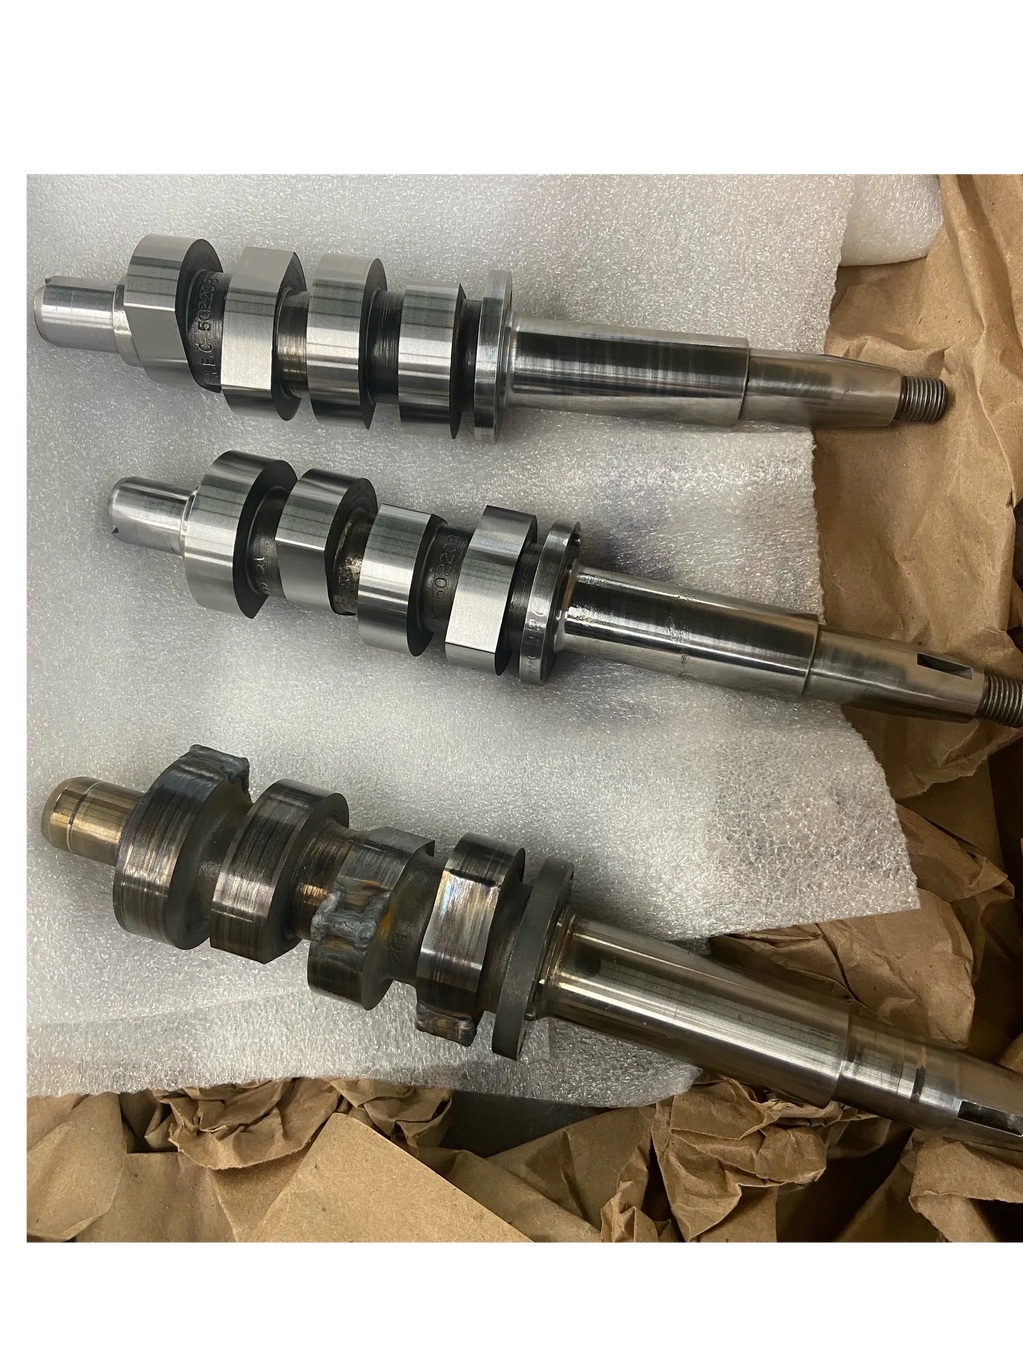 Simms Fuel Injection Pump Camshafts repaired and ready to ship